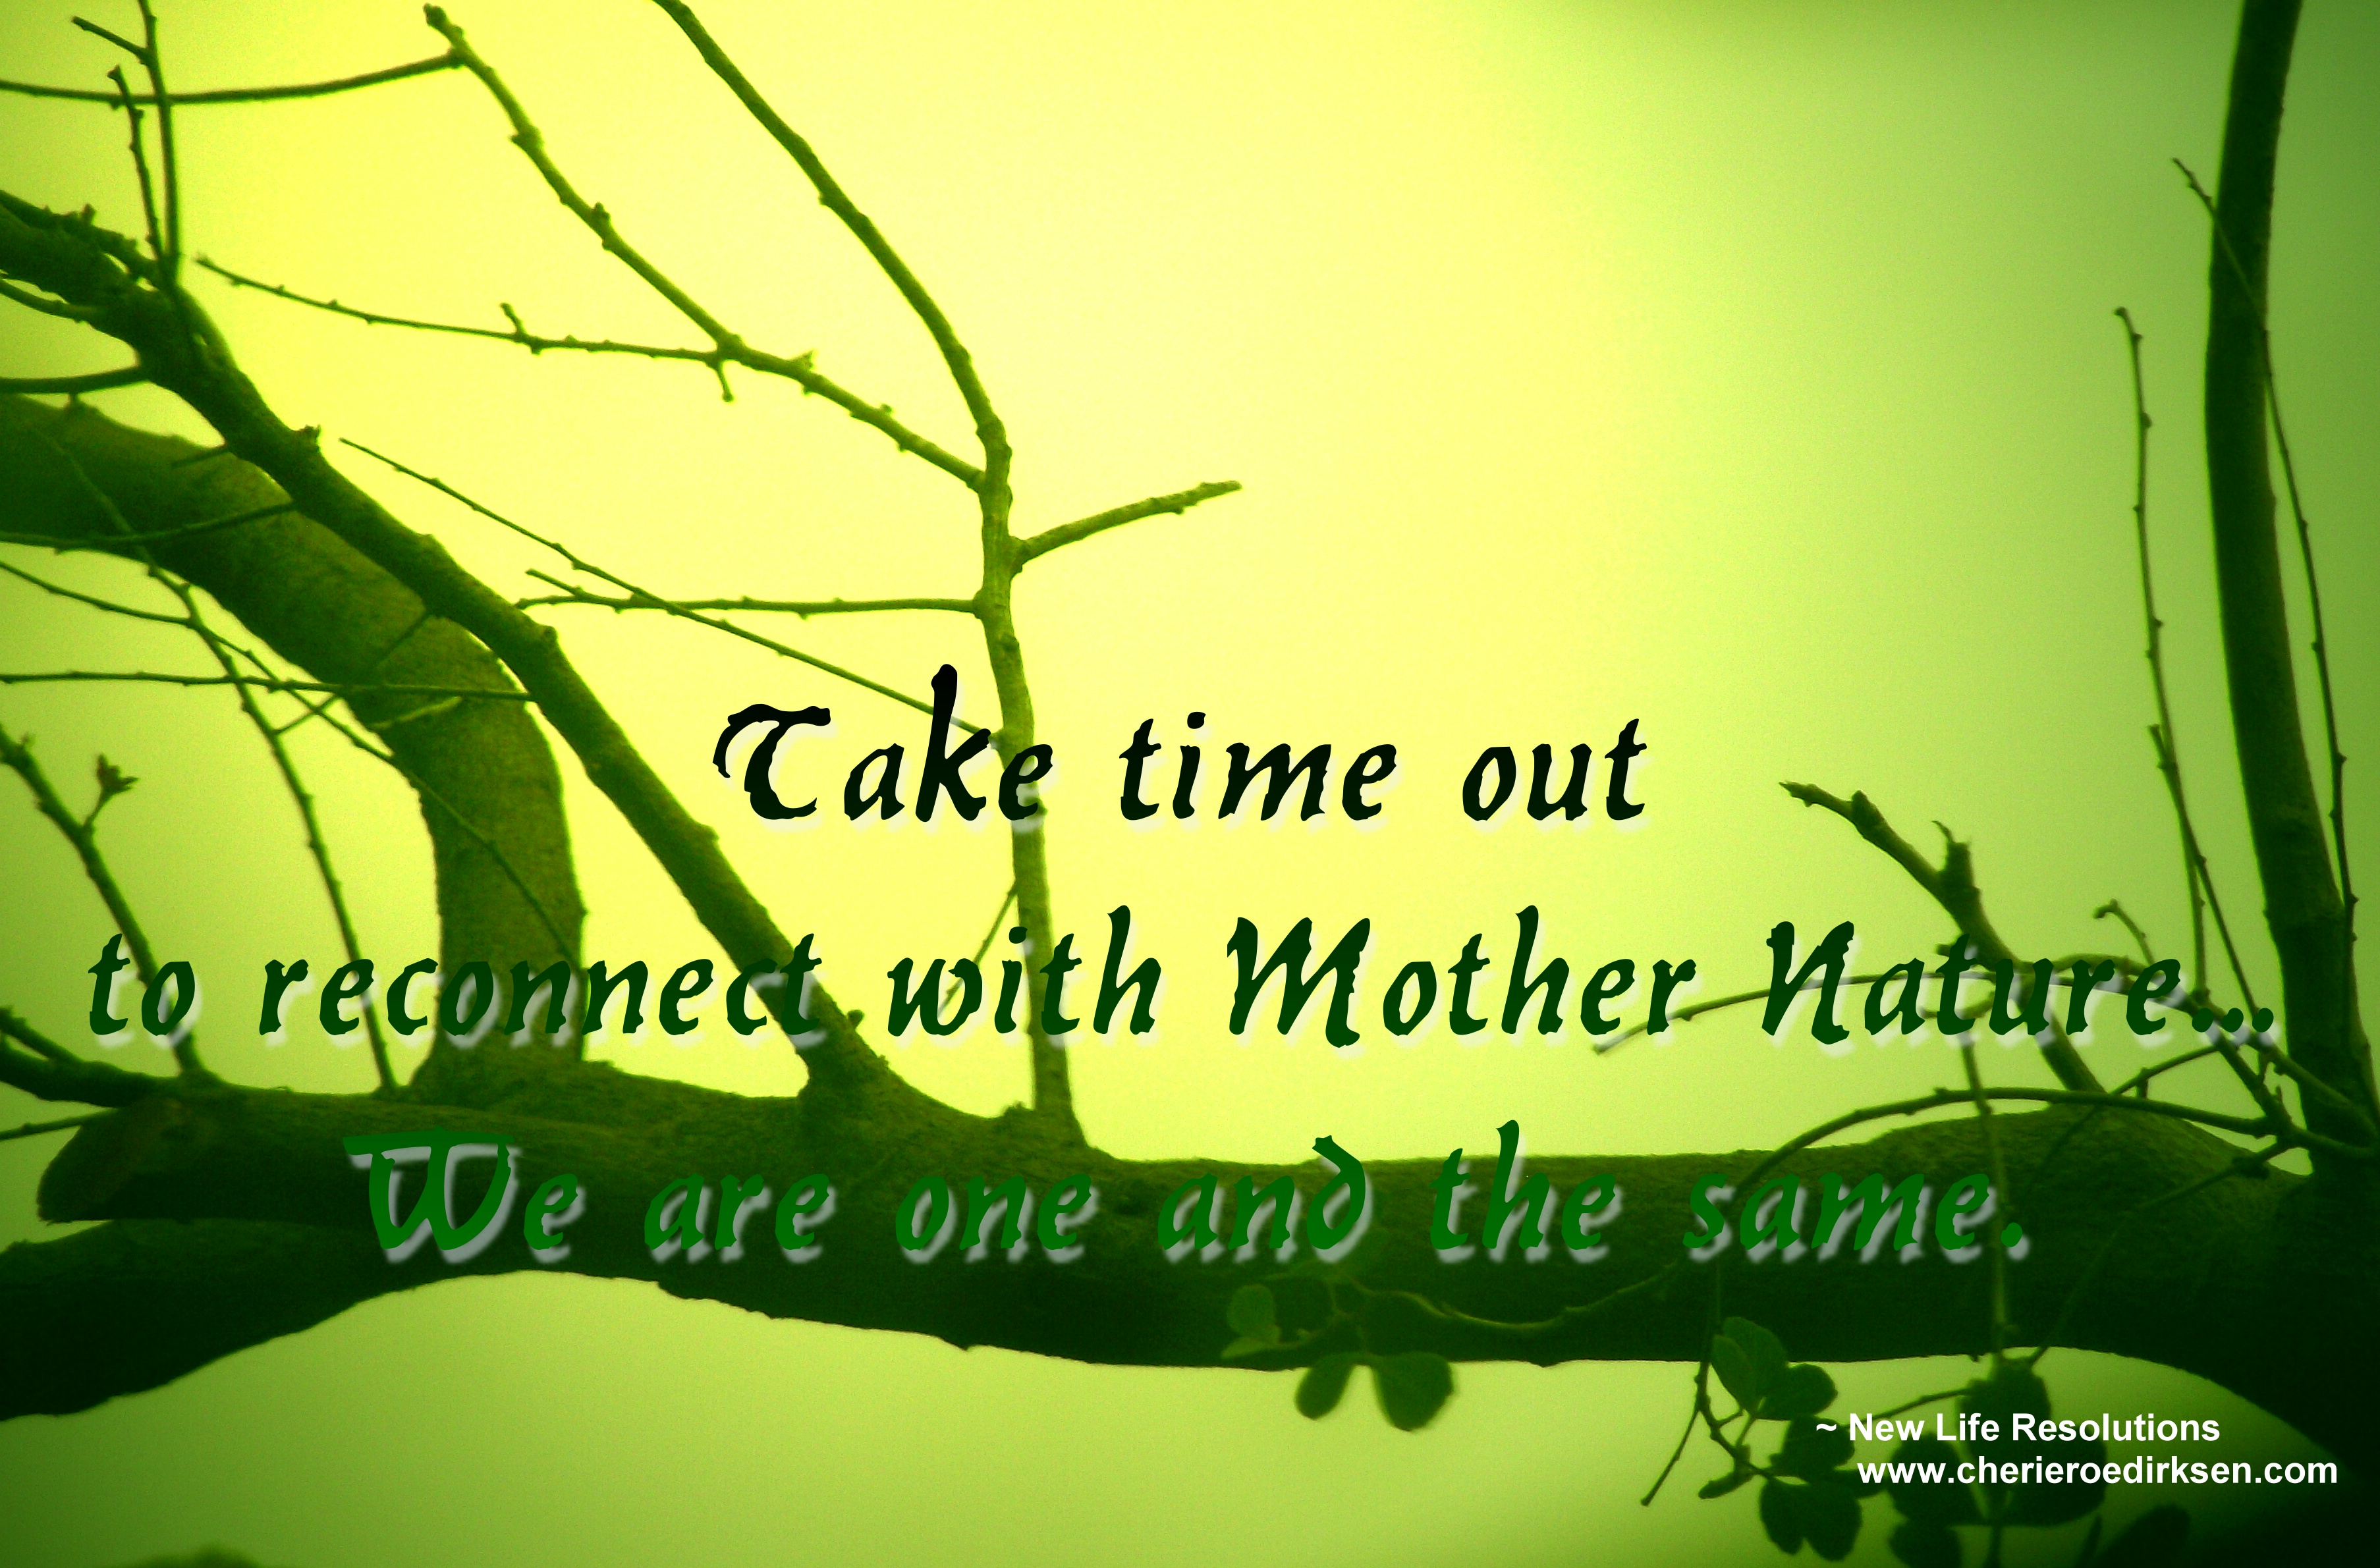 New life have you. Quotes about nature. New Life Wallpaper. Quotes about mother nature. Nature quotations in English.